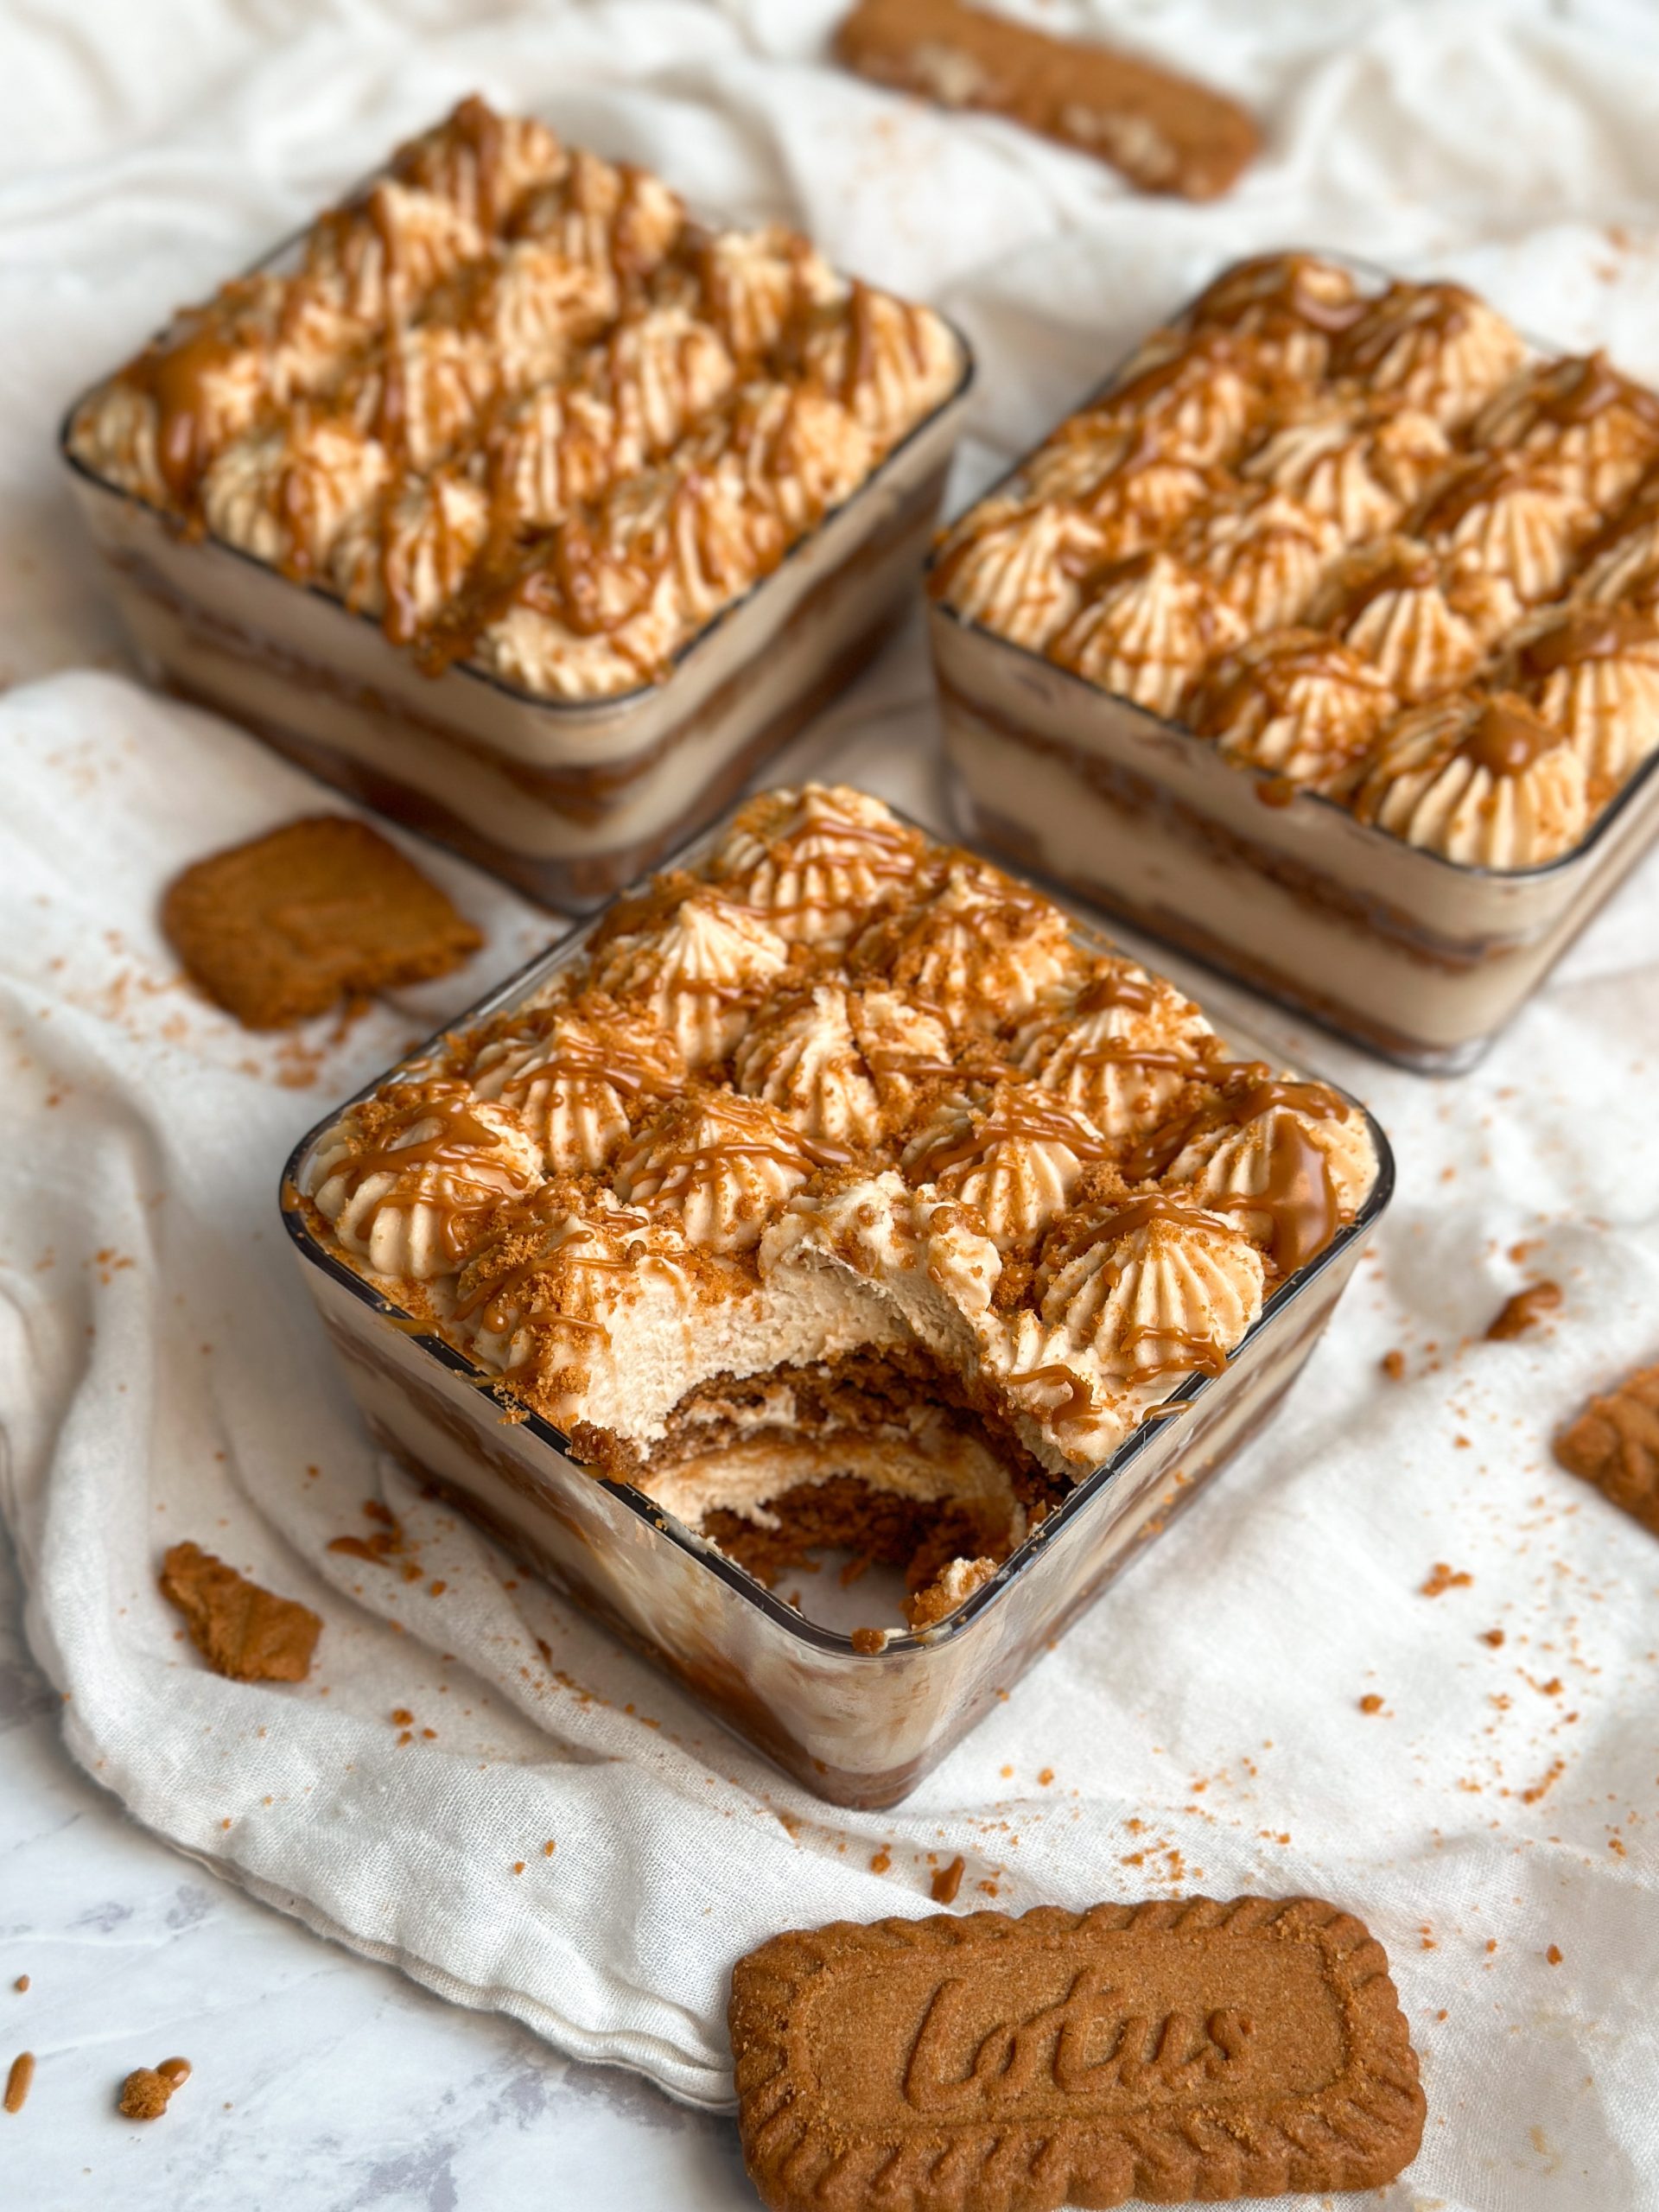 3 square dessert cups with biscoff tiramisu . layers of biscoff cream and cookies seen from the side. decorated with piping and crushed biscoff cookies and drizzled cookie butter. one cup is in focus in the front with a bite taken out revealing the creamy layers inside